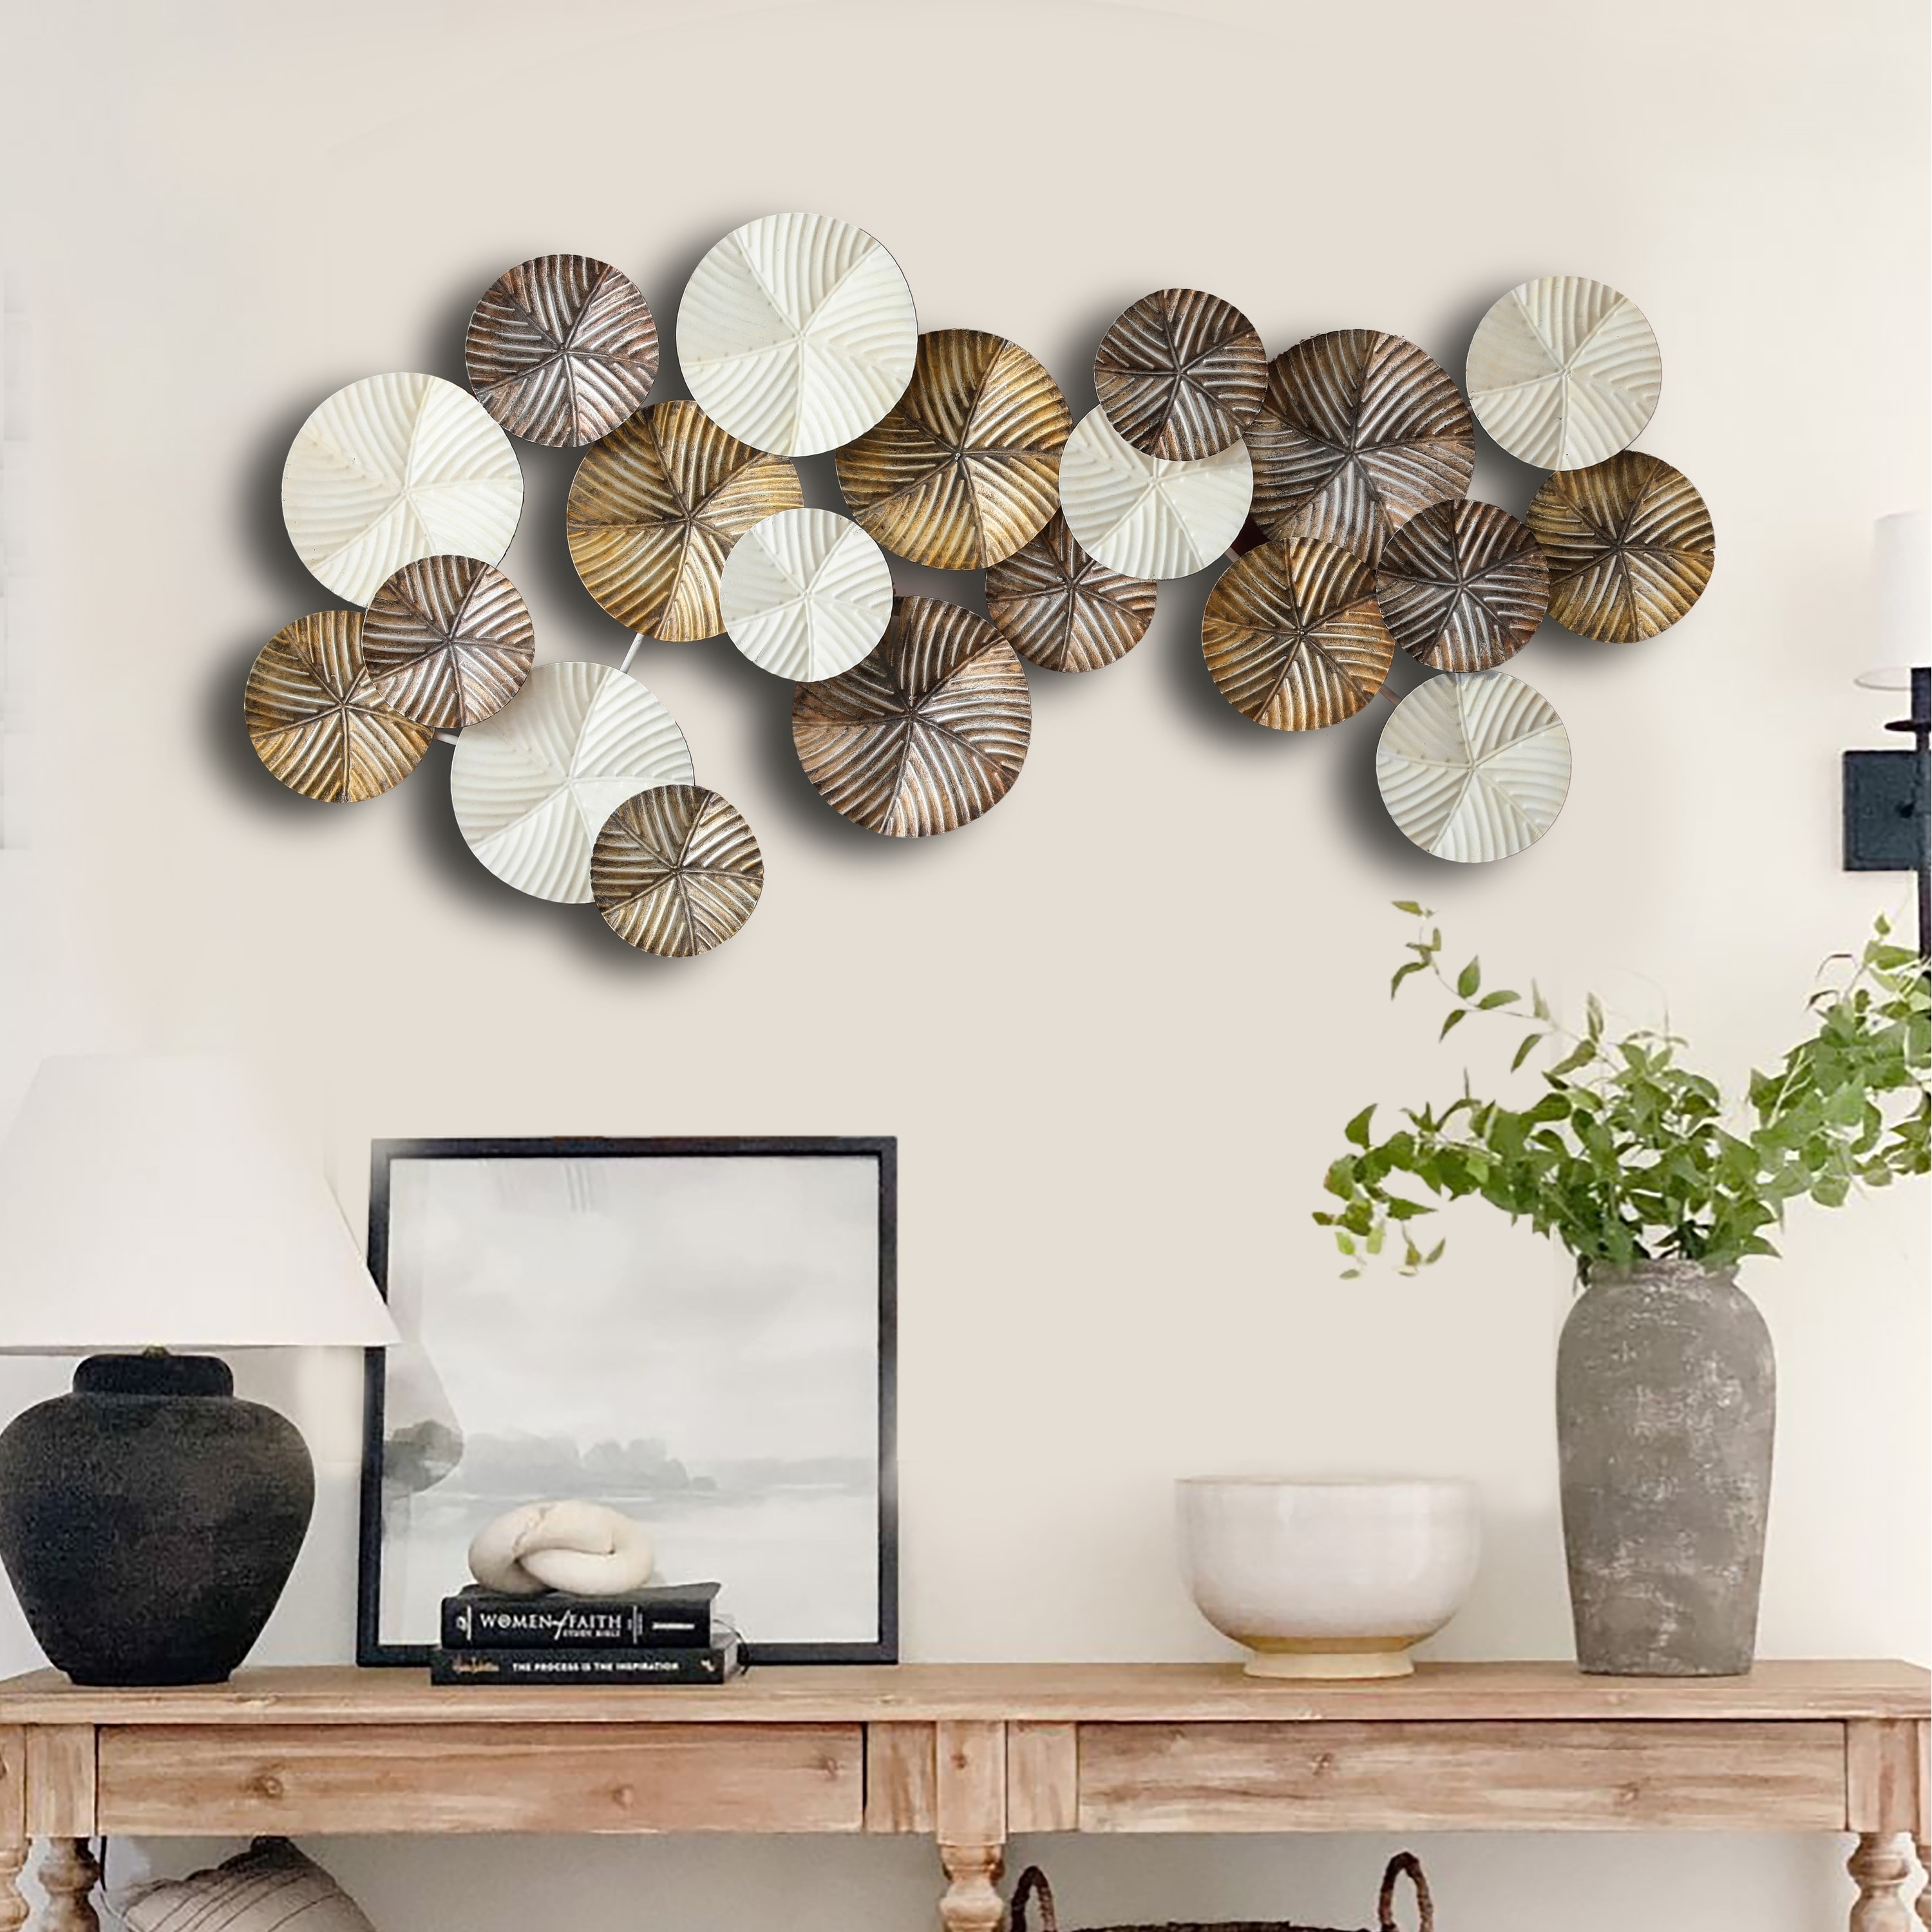 White and Gold Metal Textured Round Discs Abstract Wall Art Bed Bath   Beyond 33285961